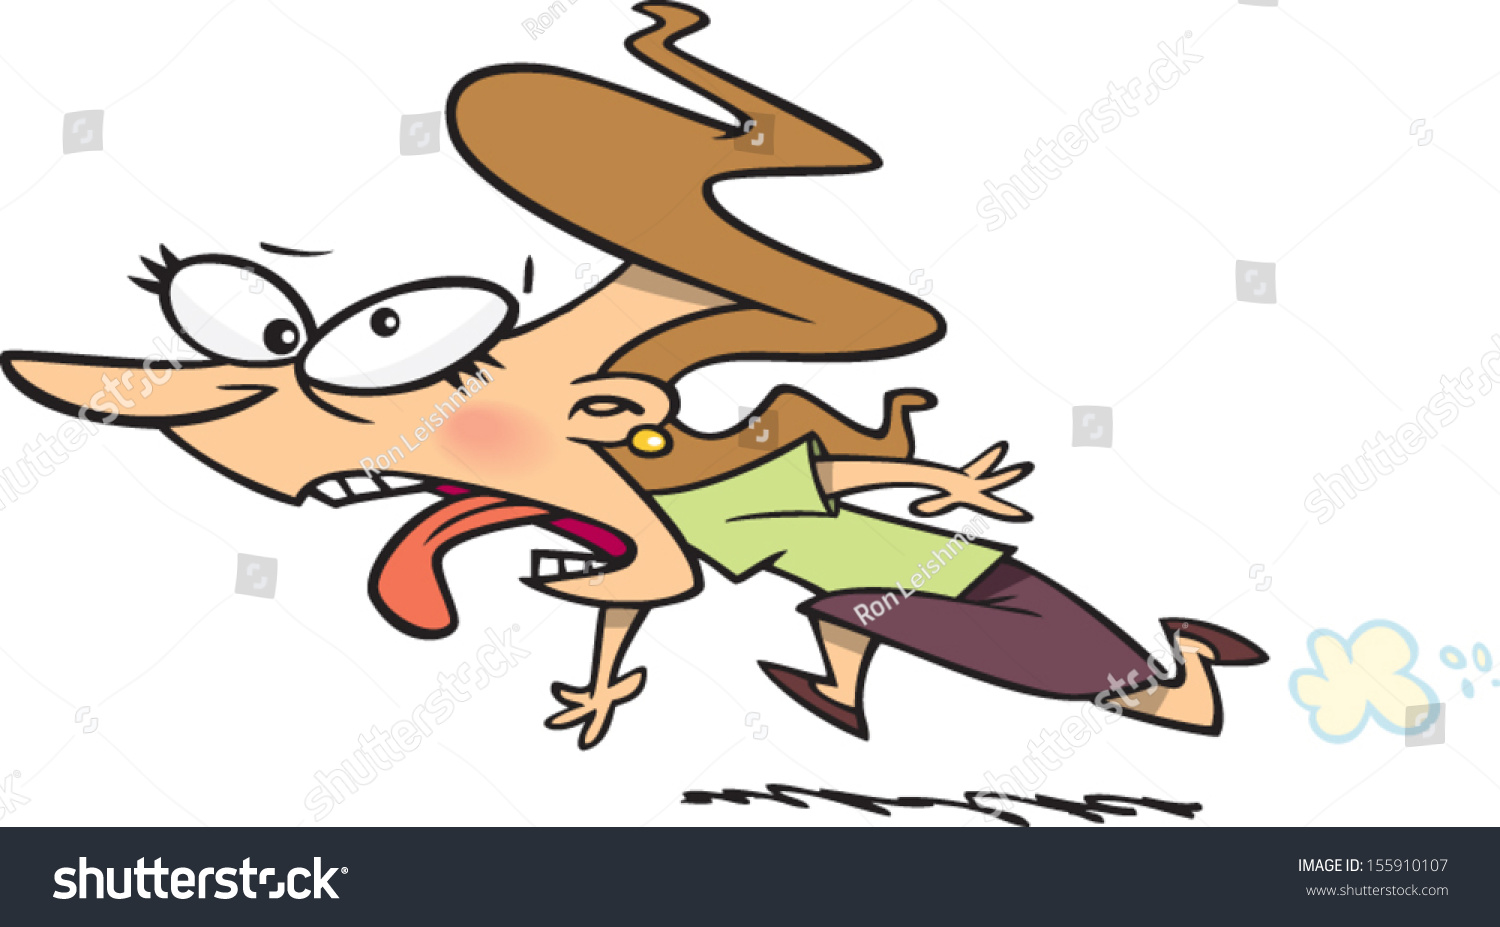 Scared Cartoon Woman Terrified And Screaming Stock Vector Illustration 155910107 Shutterstock